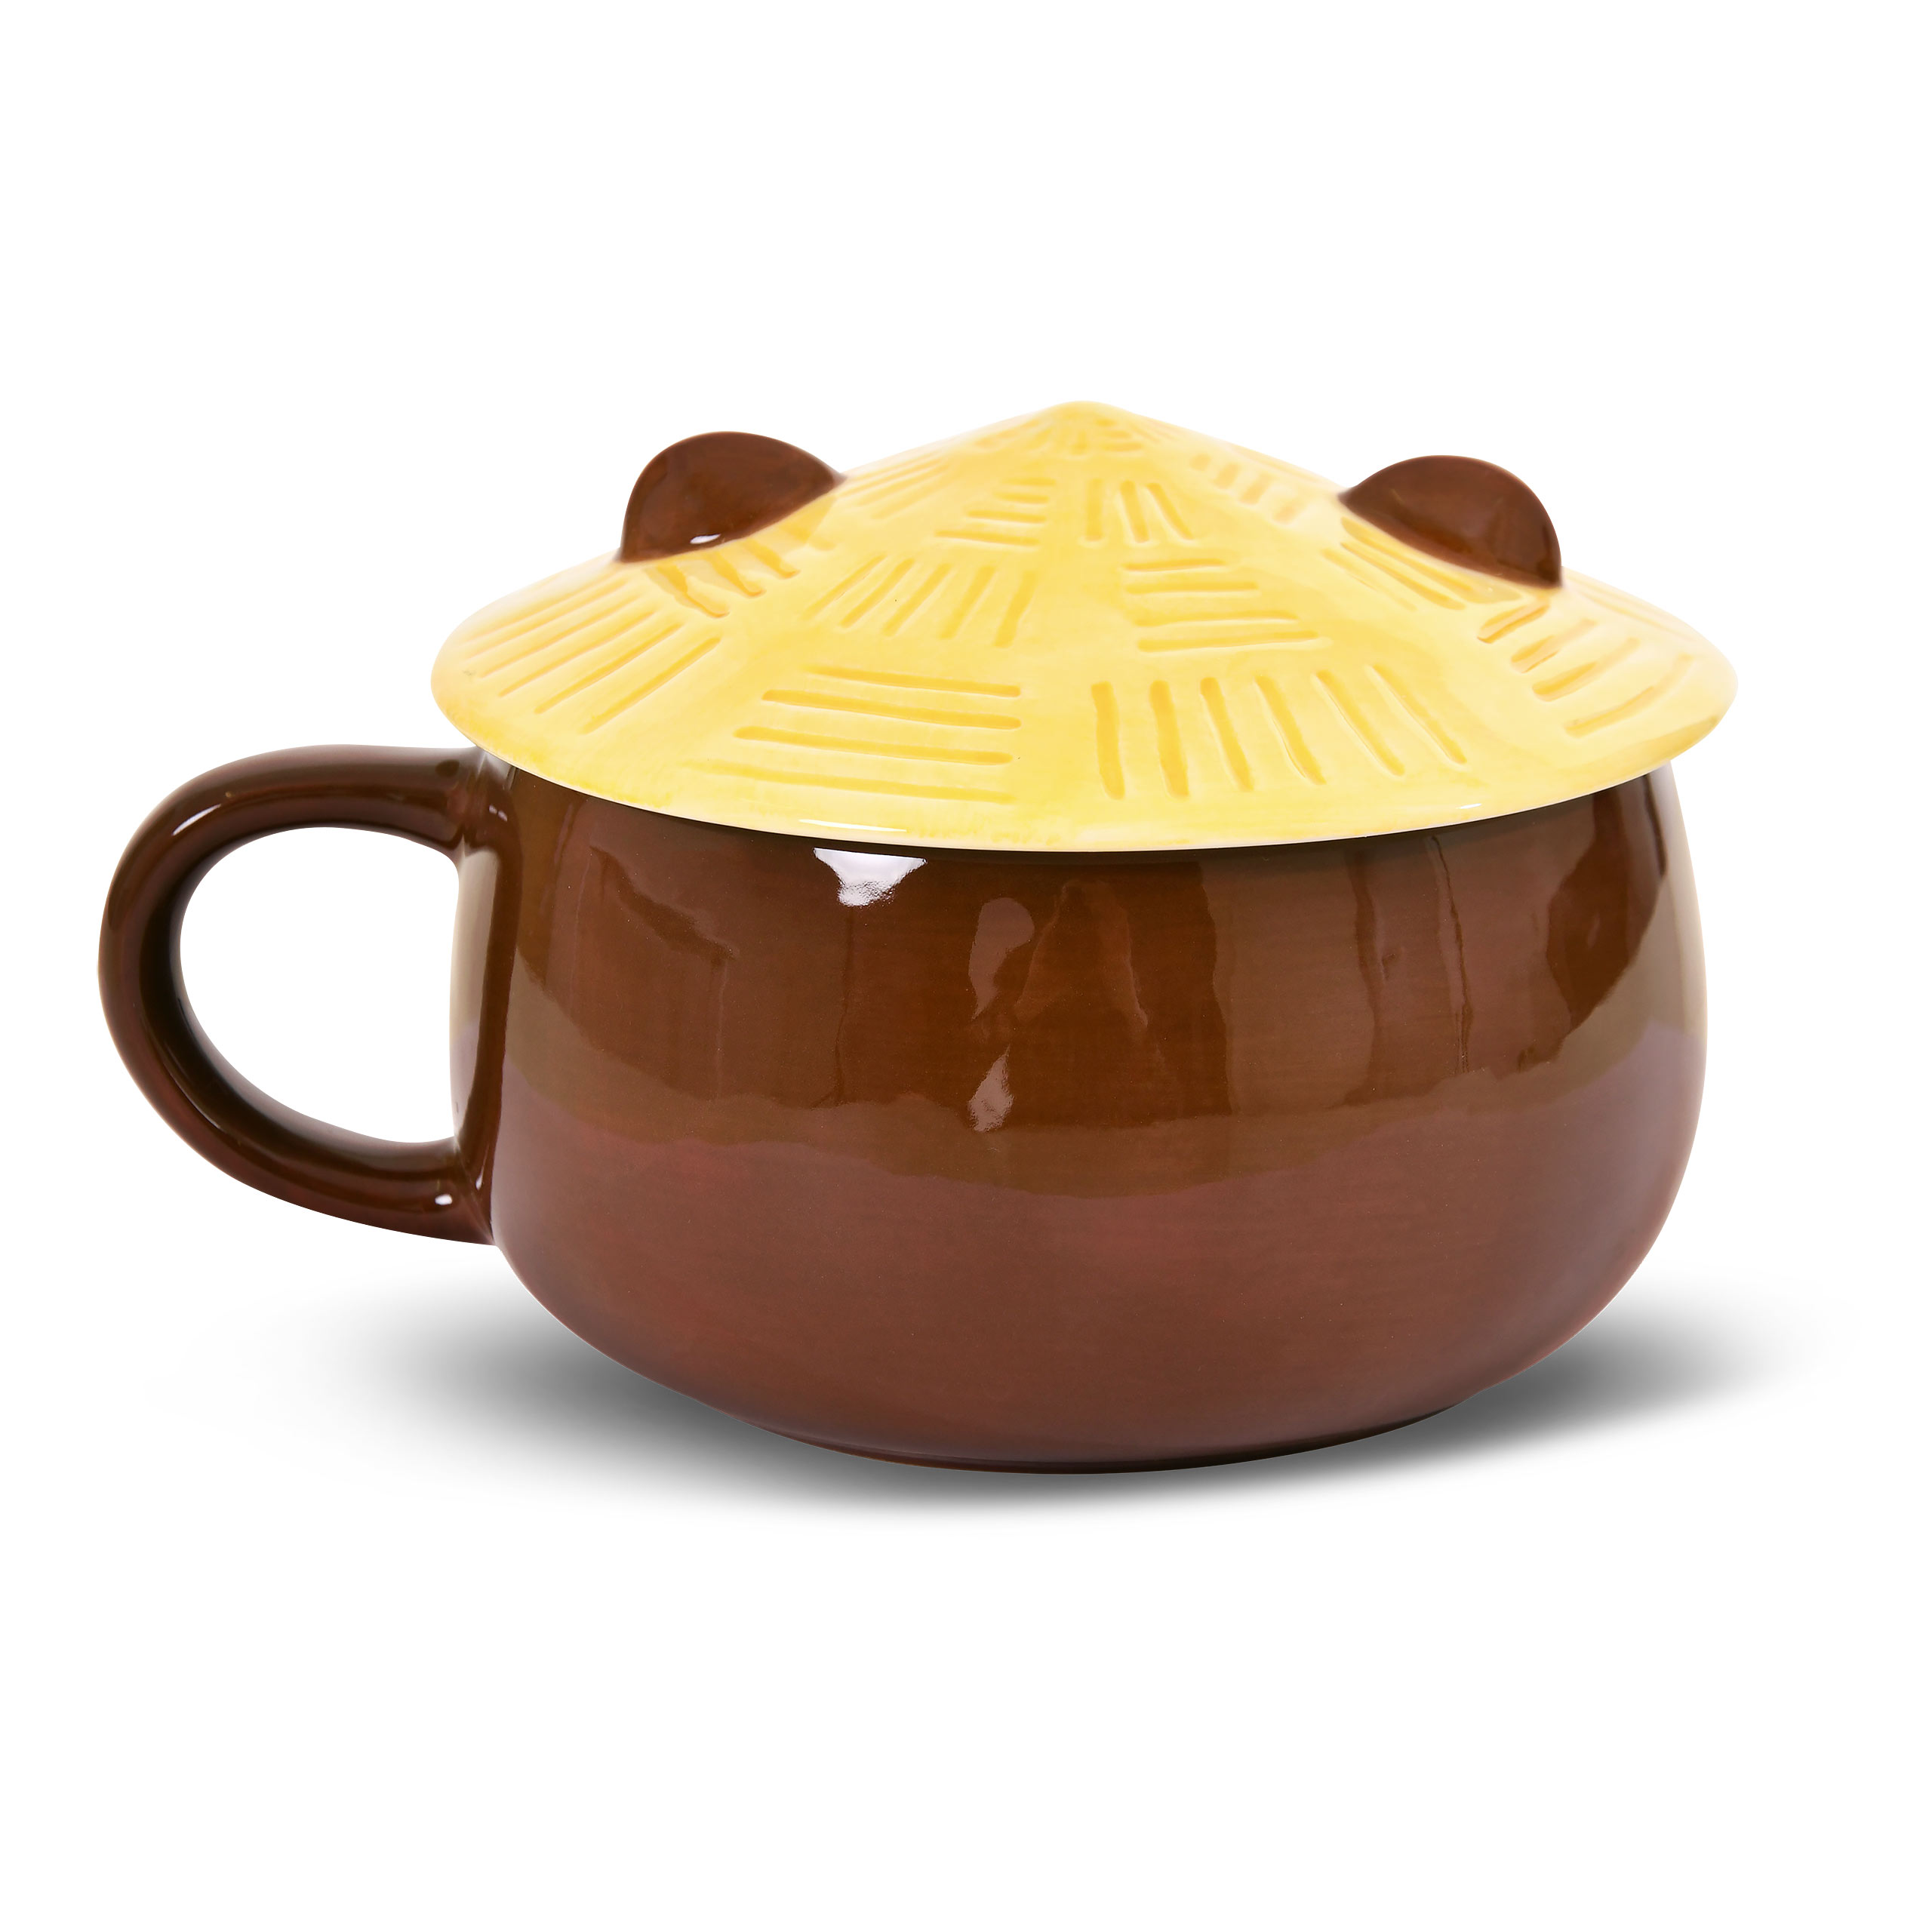 Otter Kawaii Cup with Lid for Anime Fans